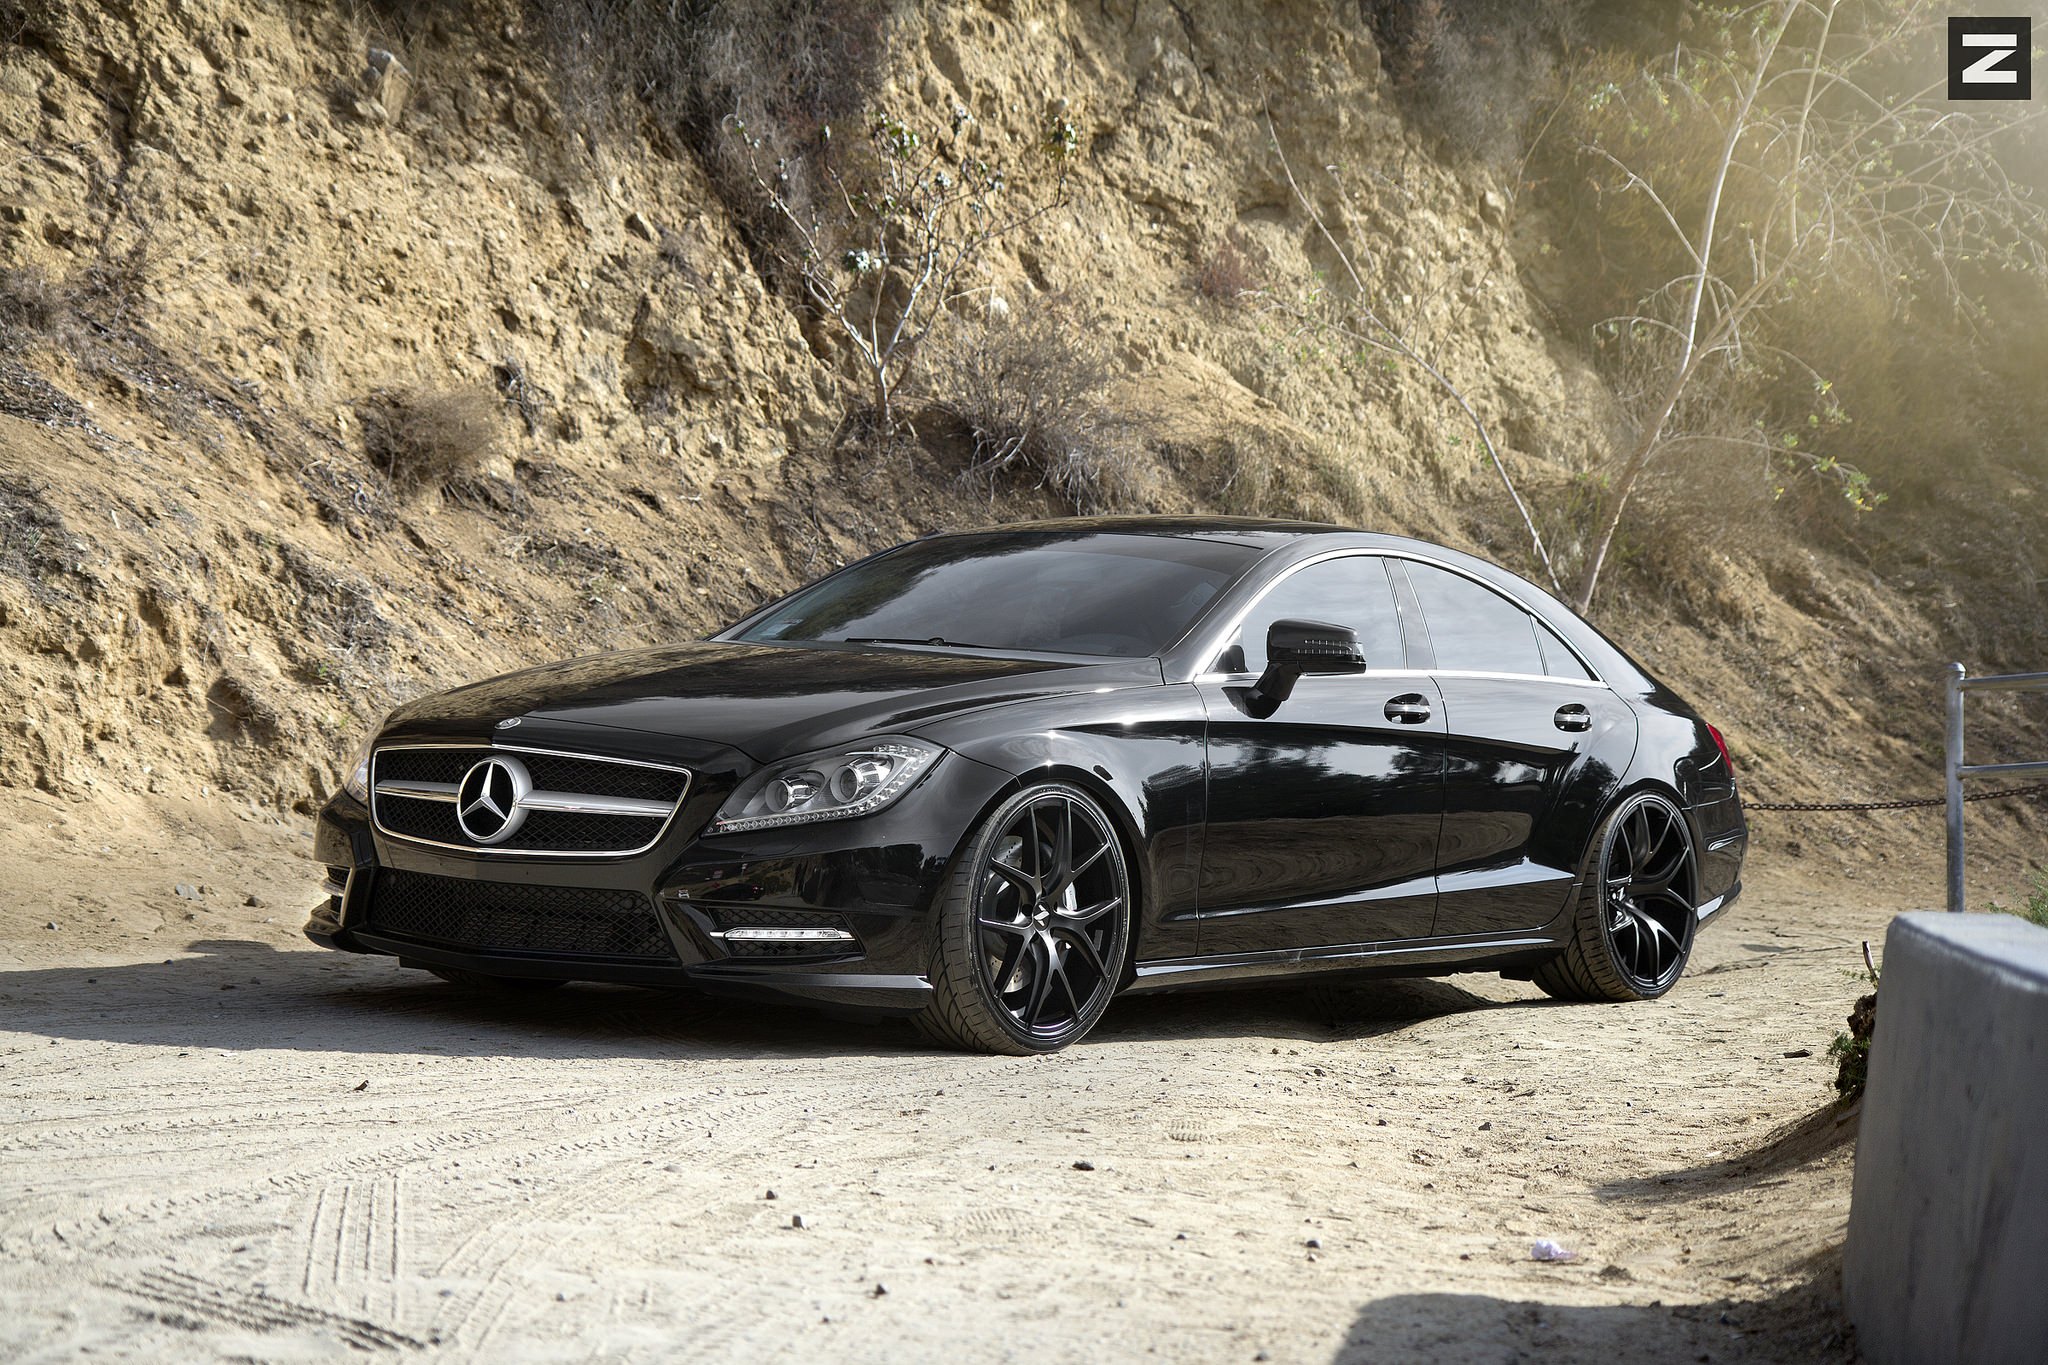 Front Bumper with LED Lights on Black Mercedes CLS - Photo by Zito Wheels